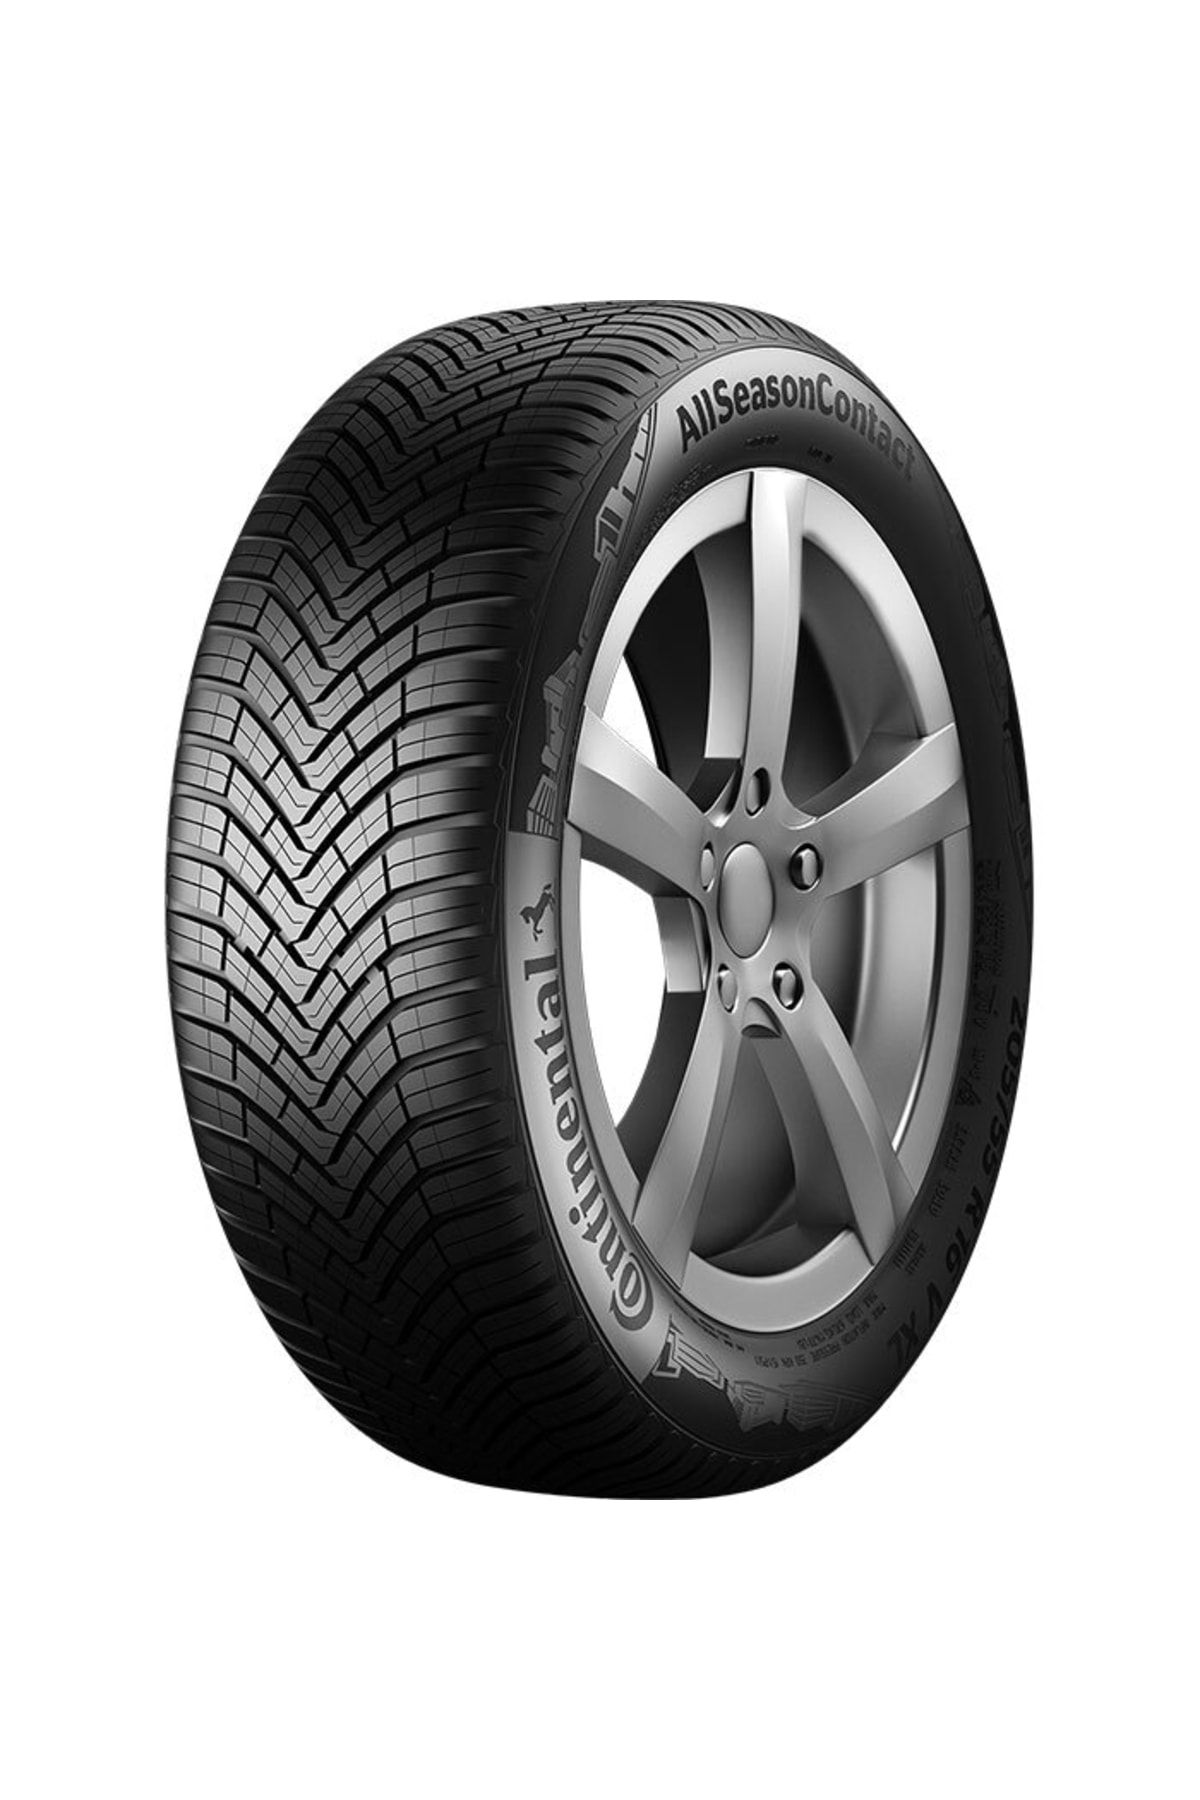 Continental ECOCONTACT 6 195/60 r15 88h. Continental ECOCONTACT 6. Continental CONTIECOCONTACT 6 185/60 r15. Continental CONTIECOCONTACT 6 205/65 r15 94h.